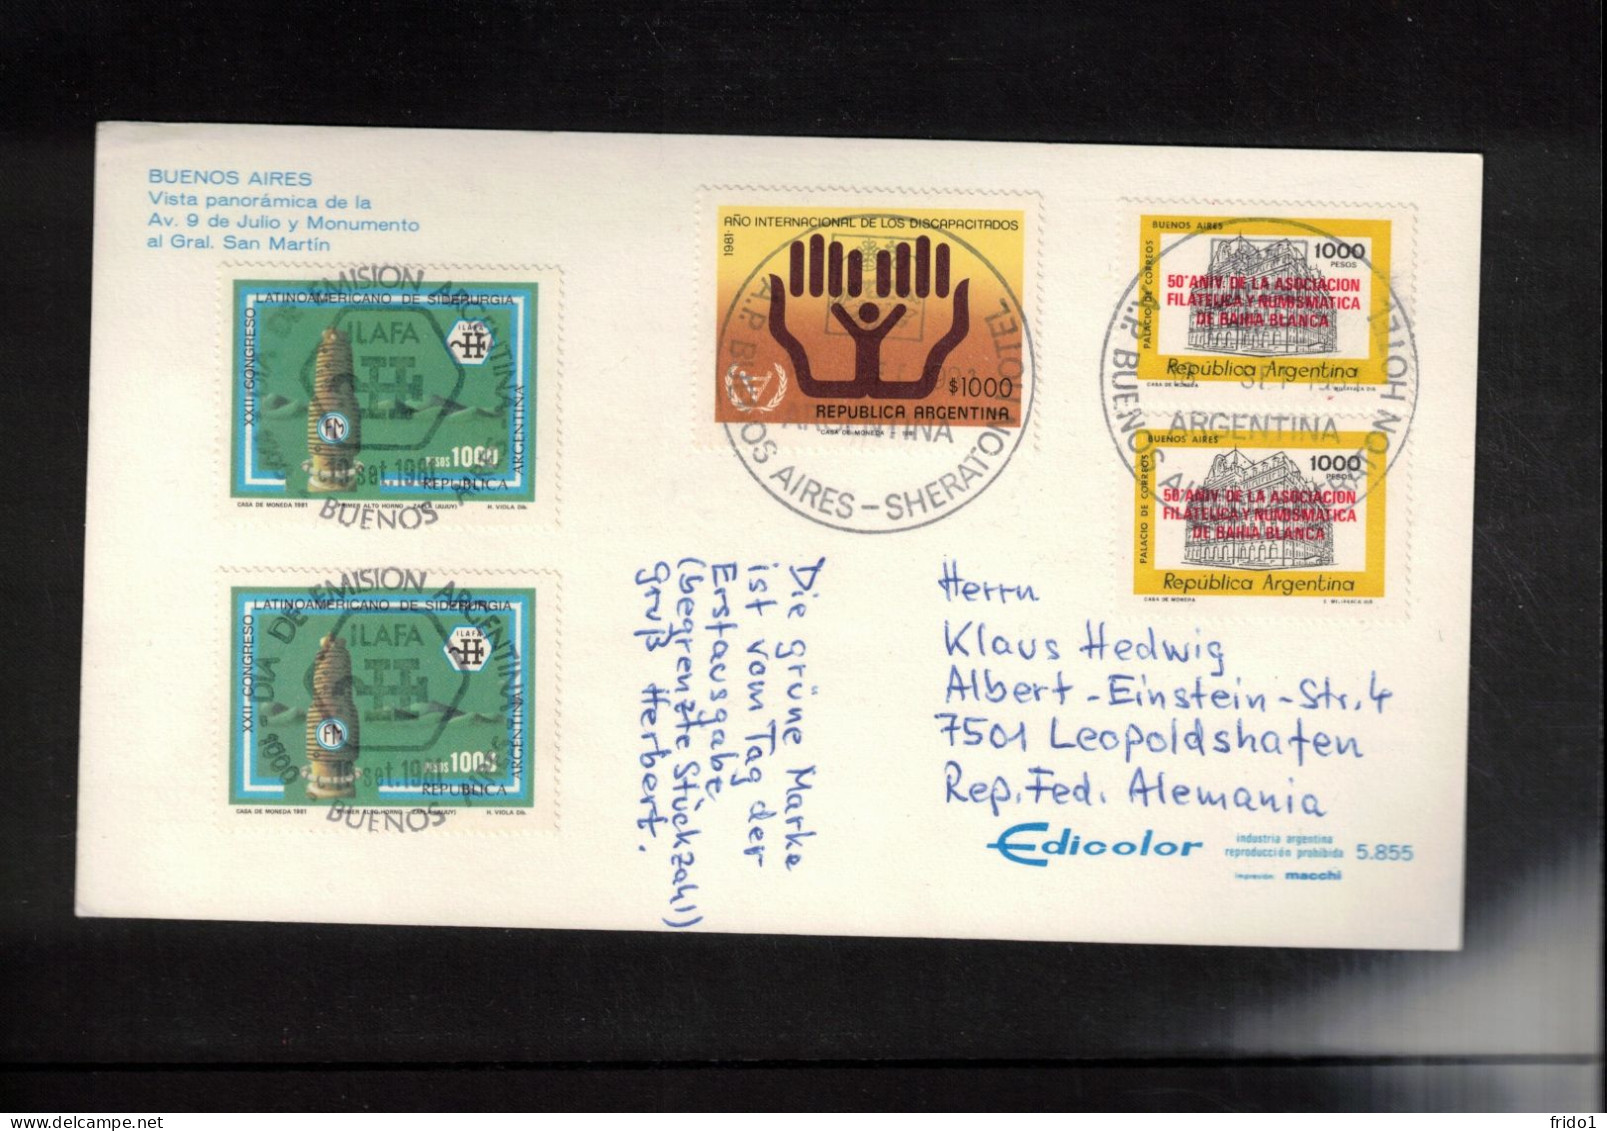 Argentina 1981 Interesting Postcard With HOTEL SHERATON BUENOS AIRES Postmark - Covers & Documents